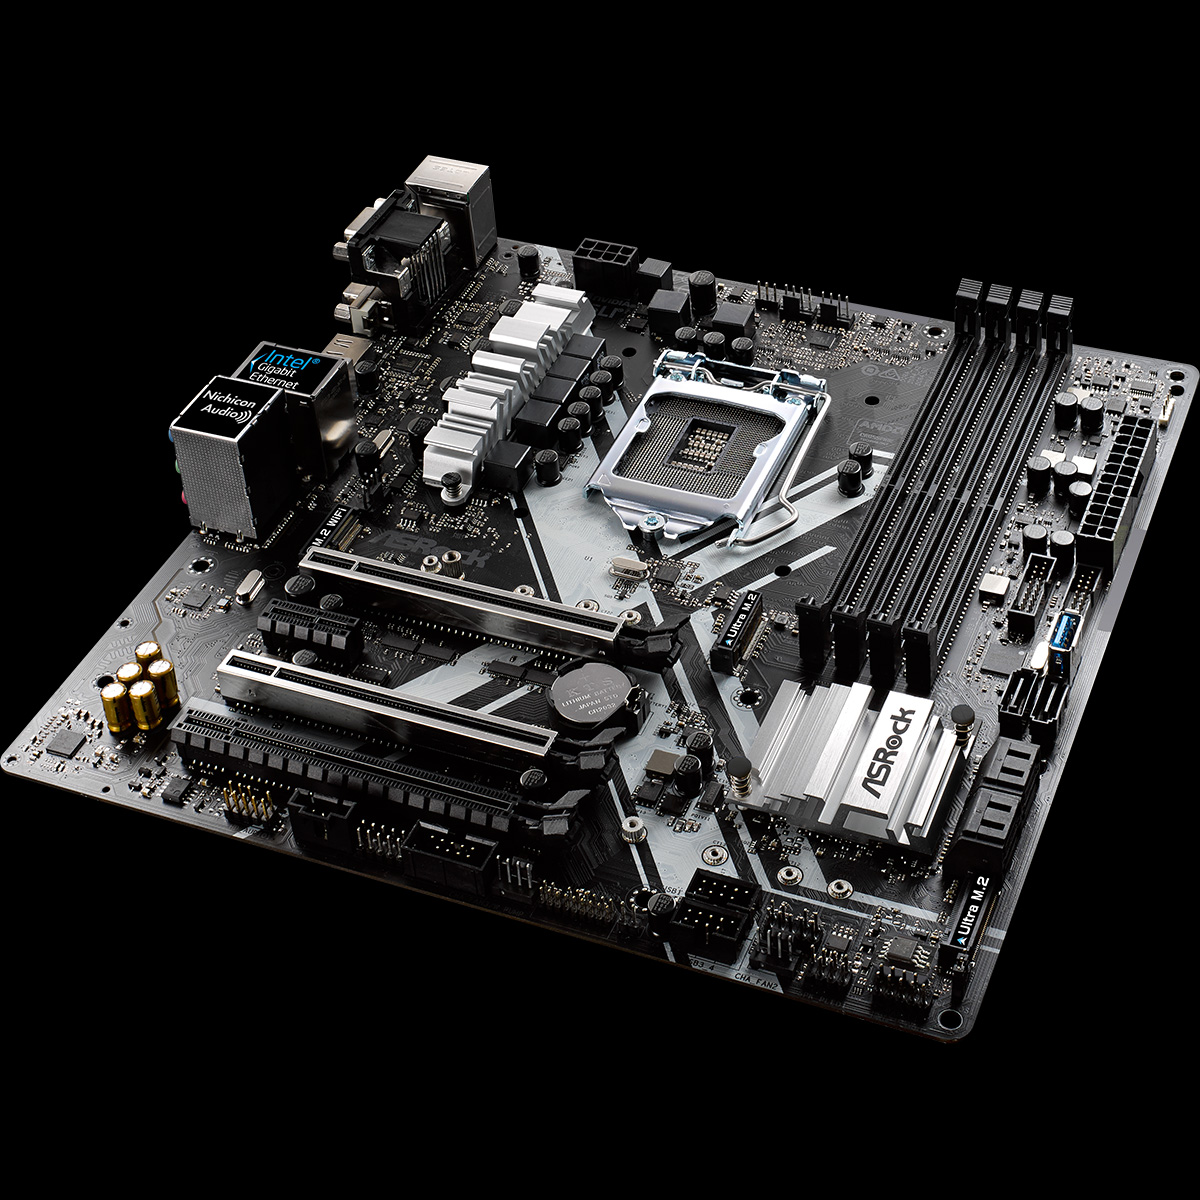 Asrock Z270M Extreme4 - Motherboard Specifications On MotherboardDB